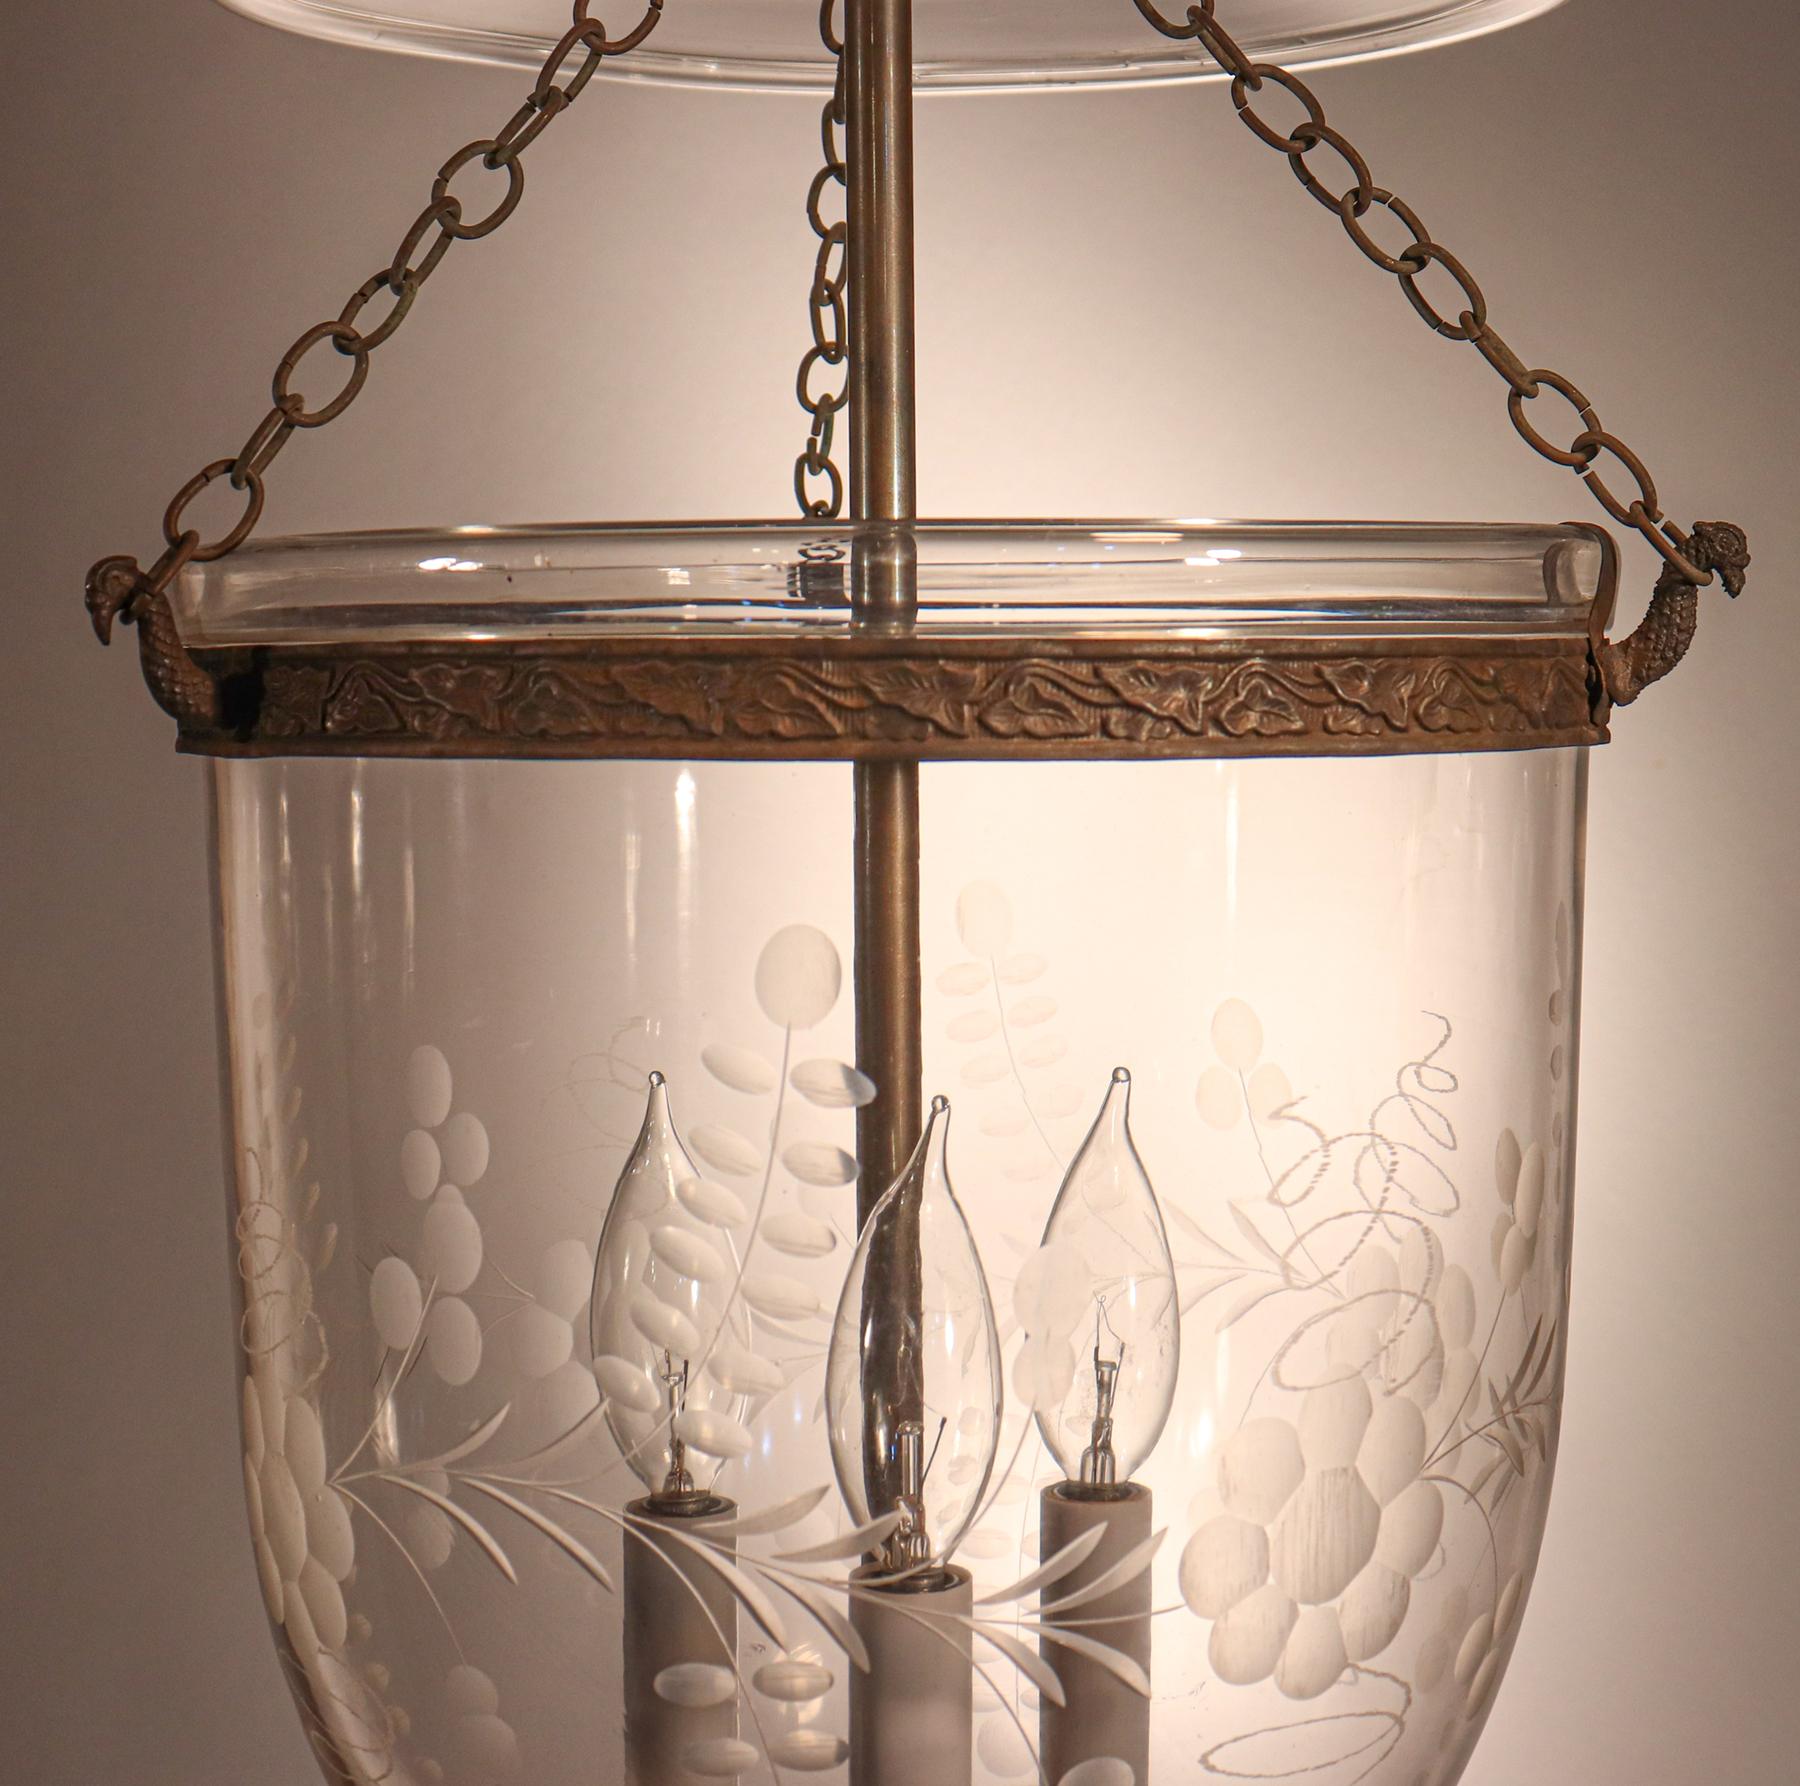 High Victorian Antique Bell Jar Lantern with Floral Etching